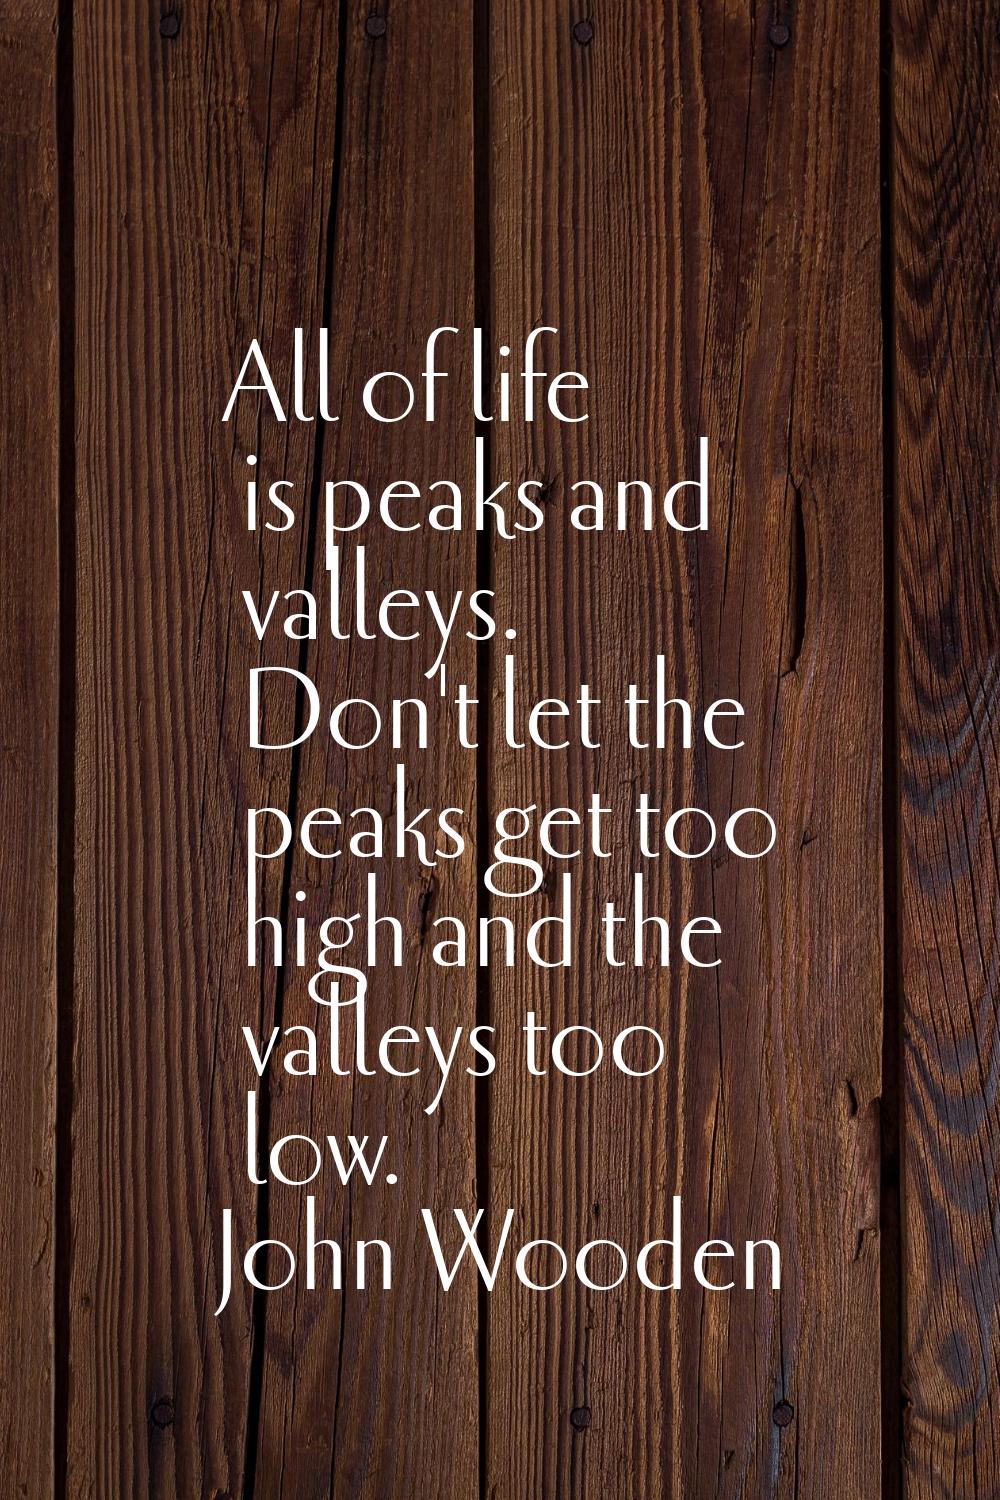 All of life is peaks and valleys. Don't let the peaks get too high and the valleys too low.